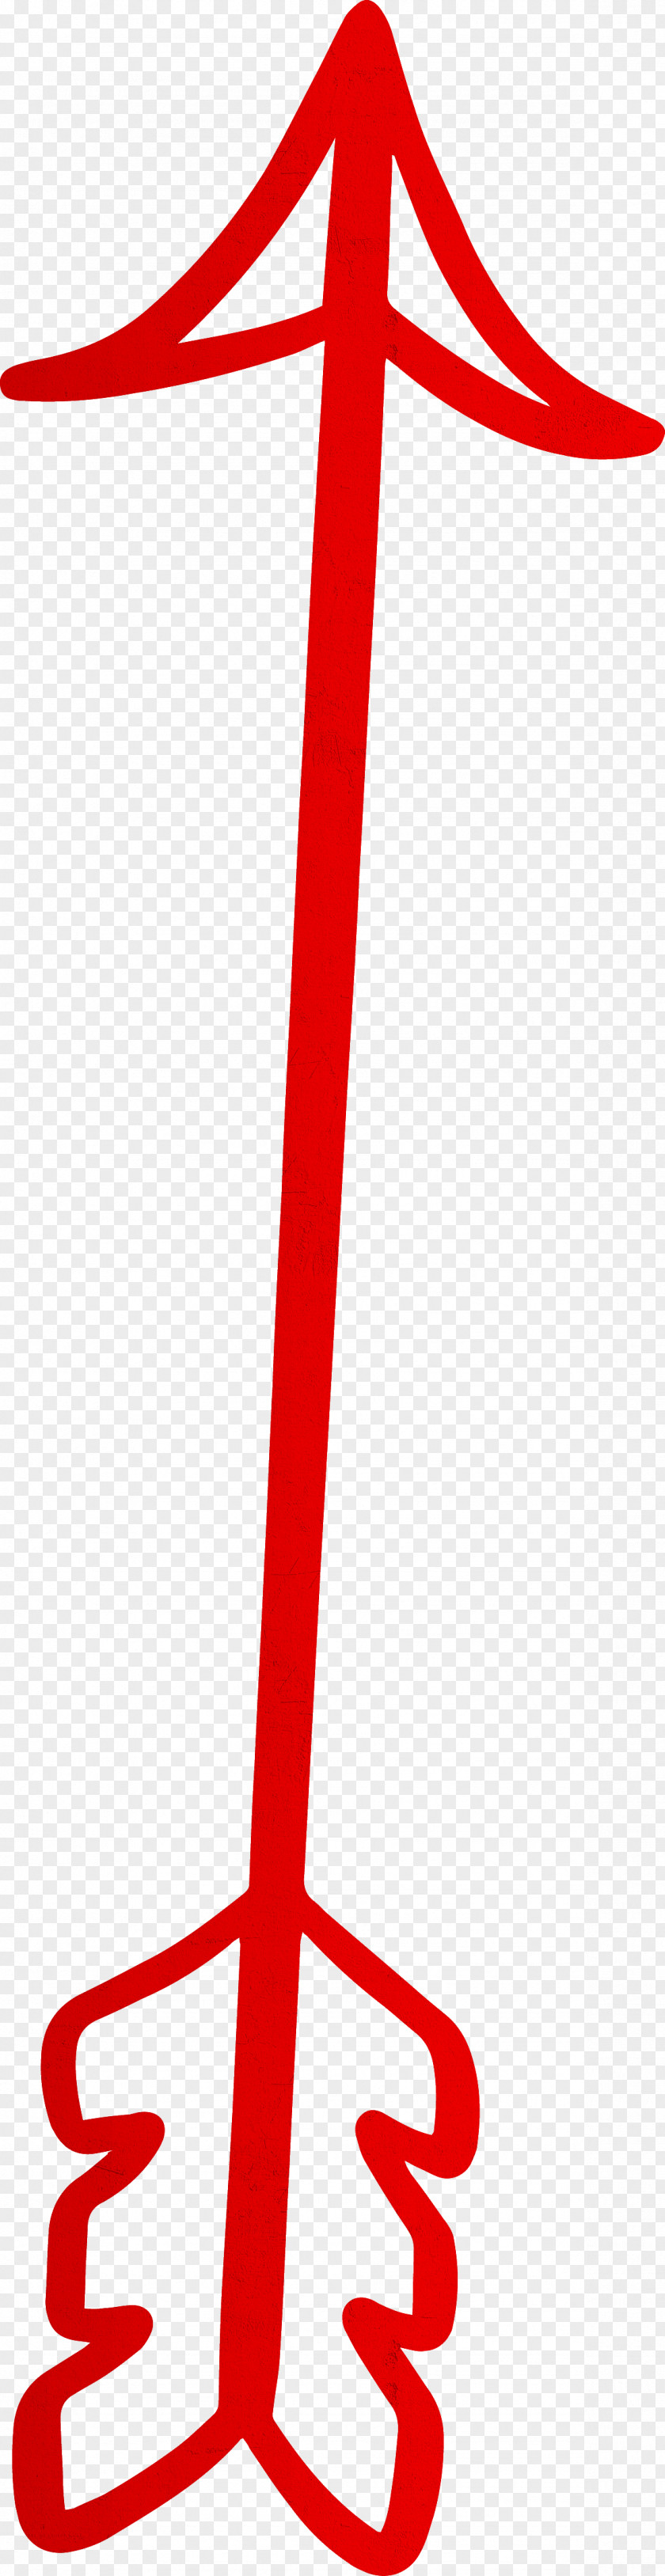 Red Line PNG